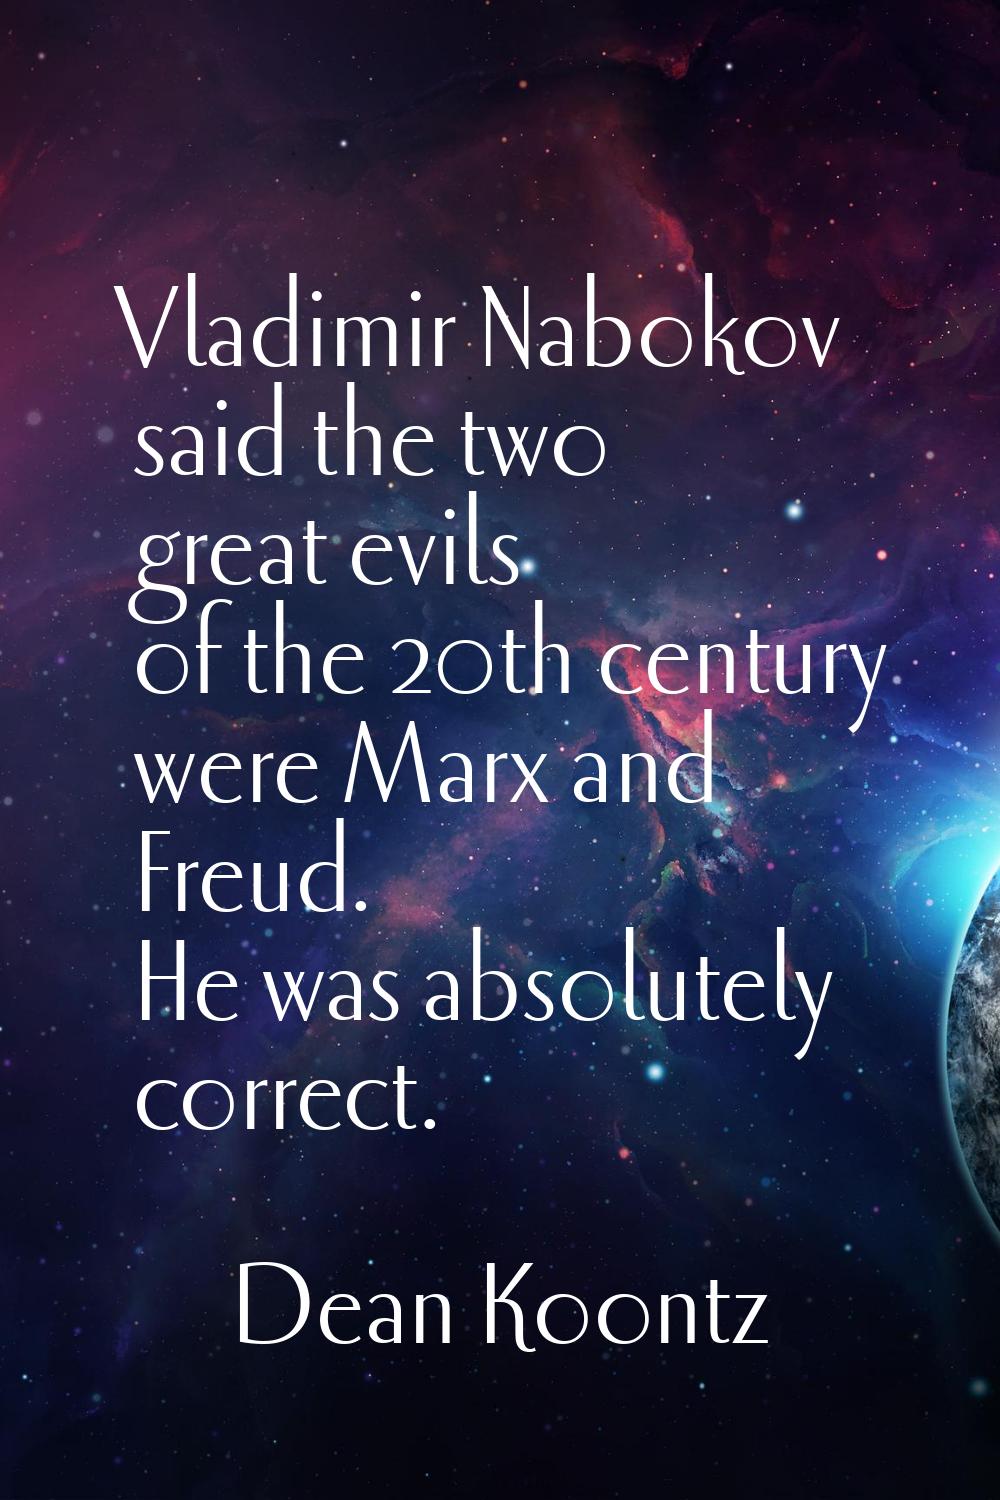 Vladimir Nabokov said the two great evils of the 20th century were Marx and Freud. He was absolutel